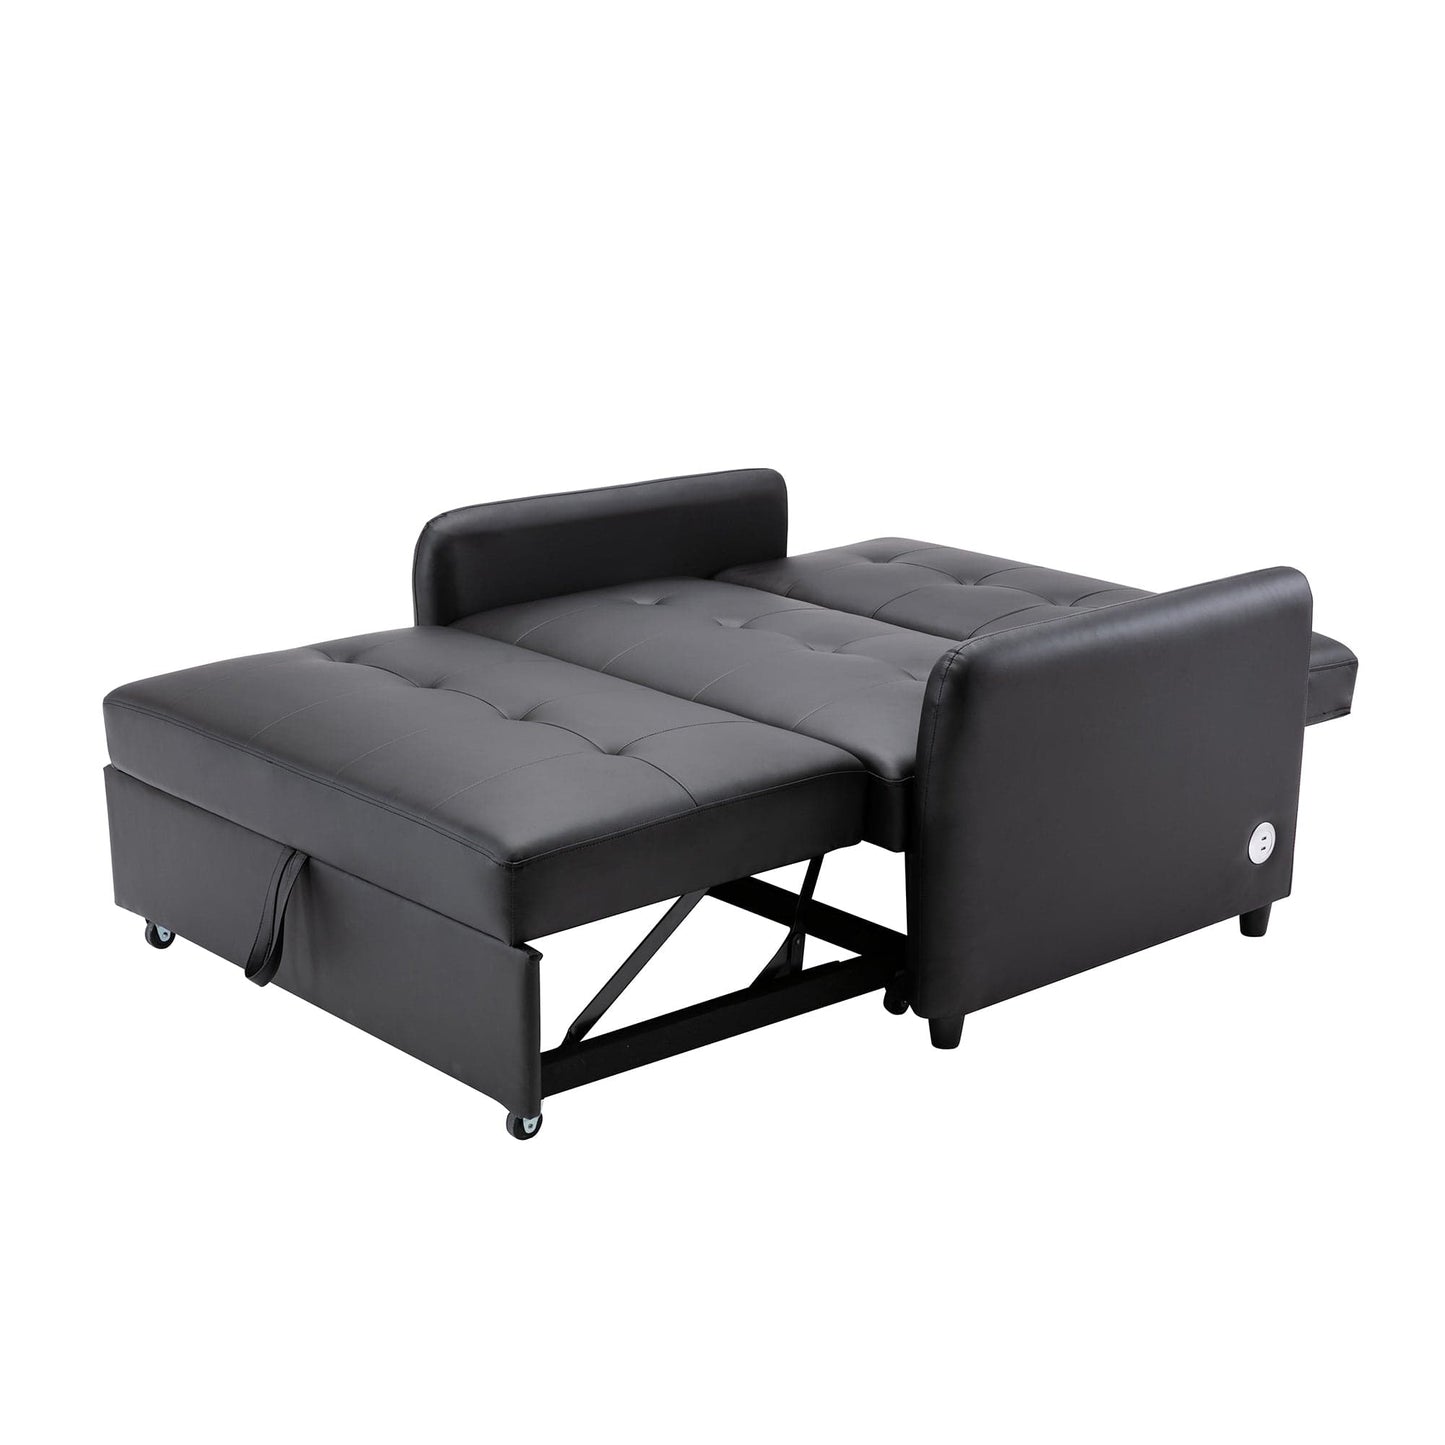 Orisfur. 51" Convertible Sleeper Bed, Adjustable Oversized Armchair  with Dual USB Ports for Small Space